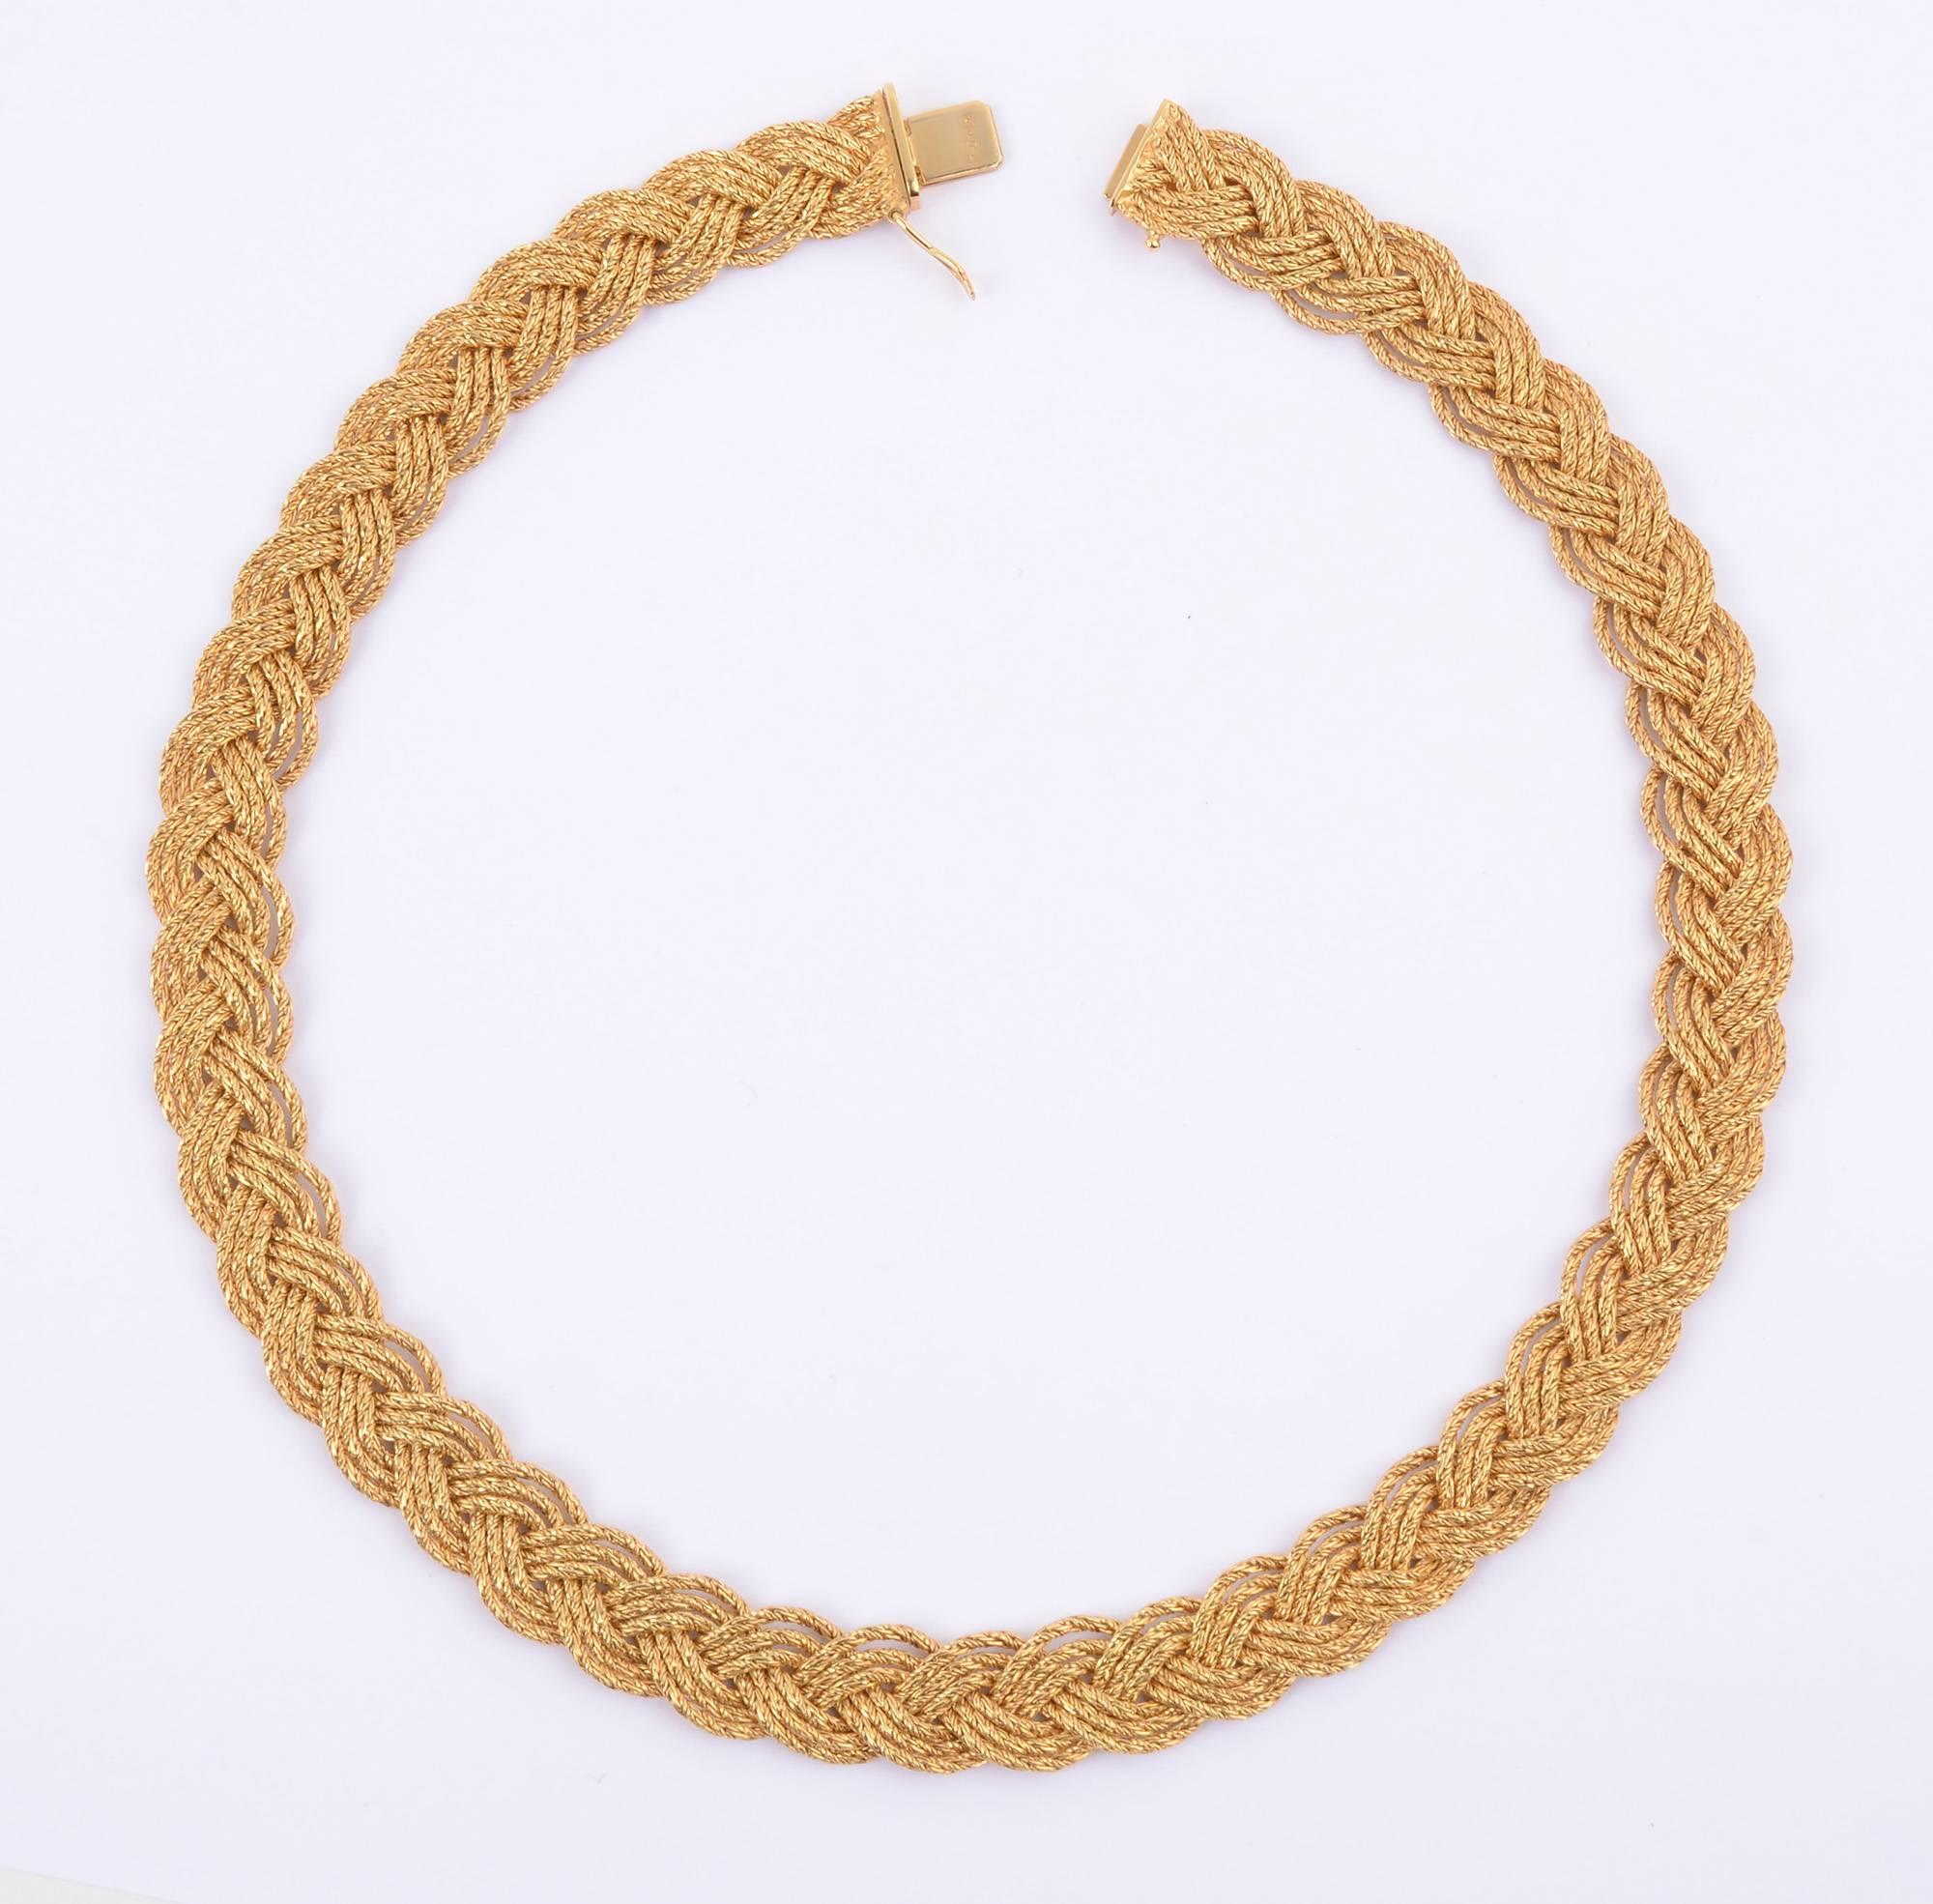 Beautiful eighteen karat gold choker necklace by Tiffany and Co. It is made of three braided strands of gold. Each strand is made  with a herringbone weave. The complexity of the braiding with the herringbone gives a wonderful glimmer to the